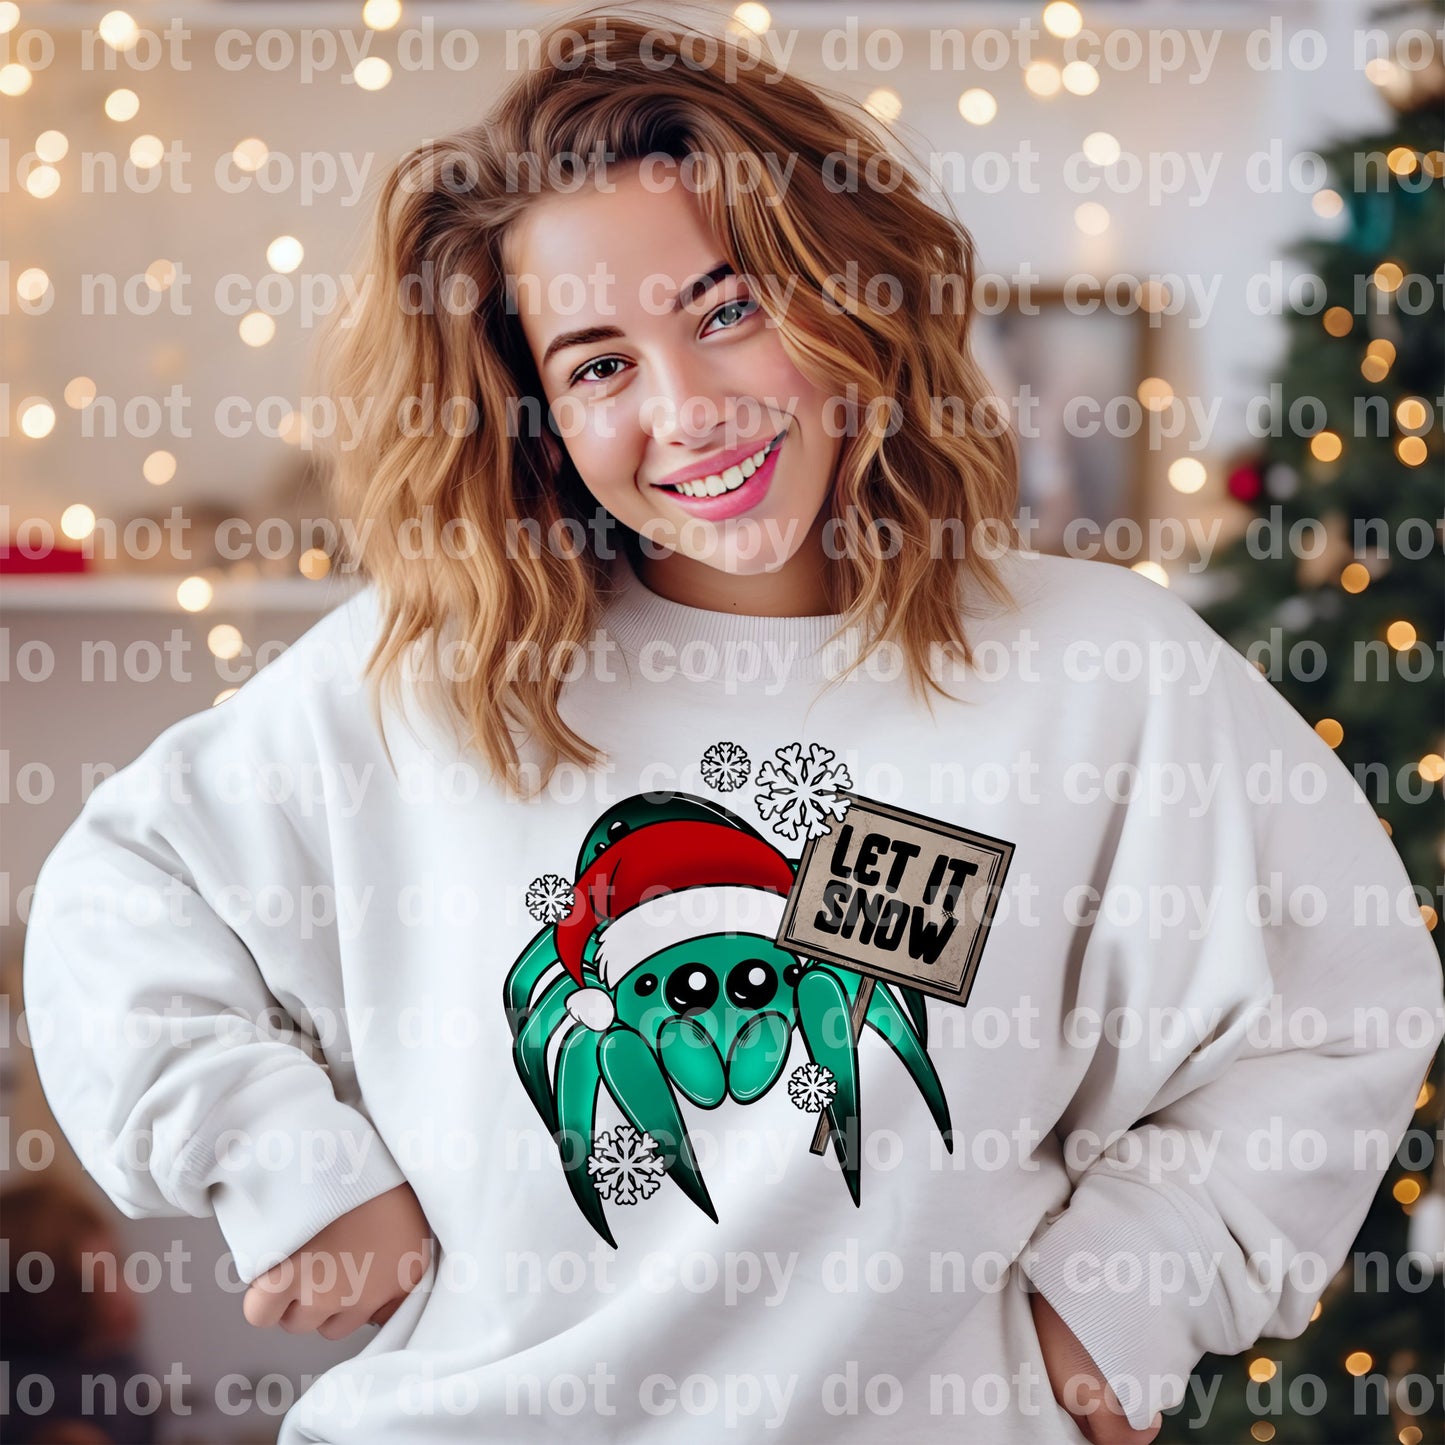 Let It Snow Spider Blue Green/Green Dream Print or Sublimation Print